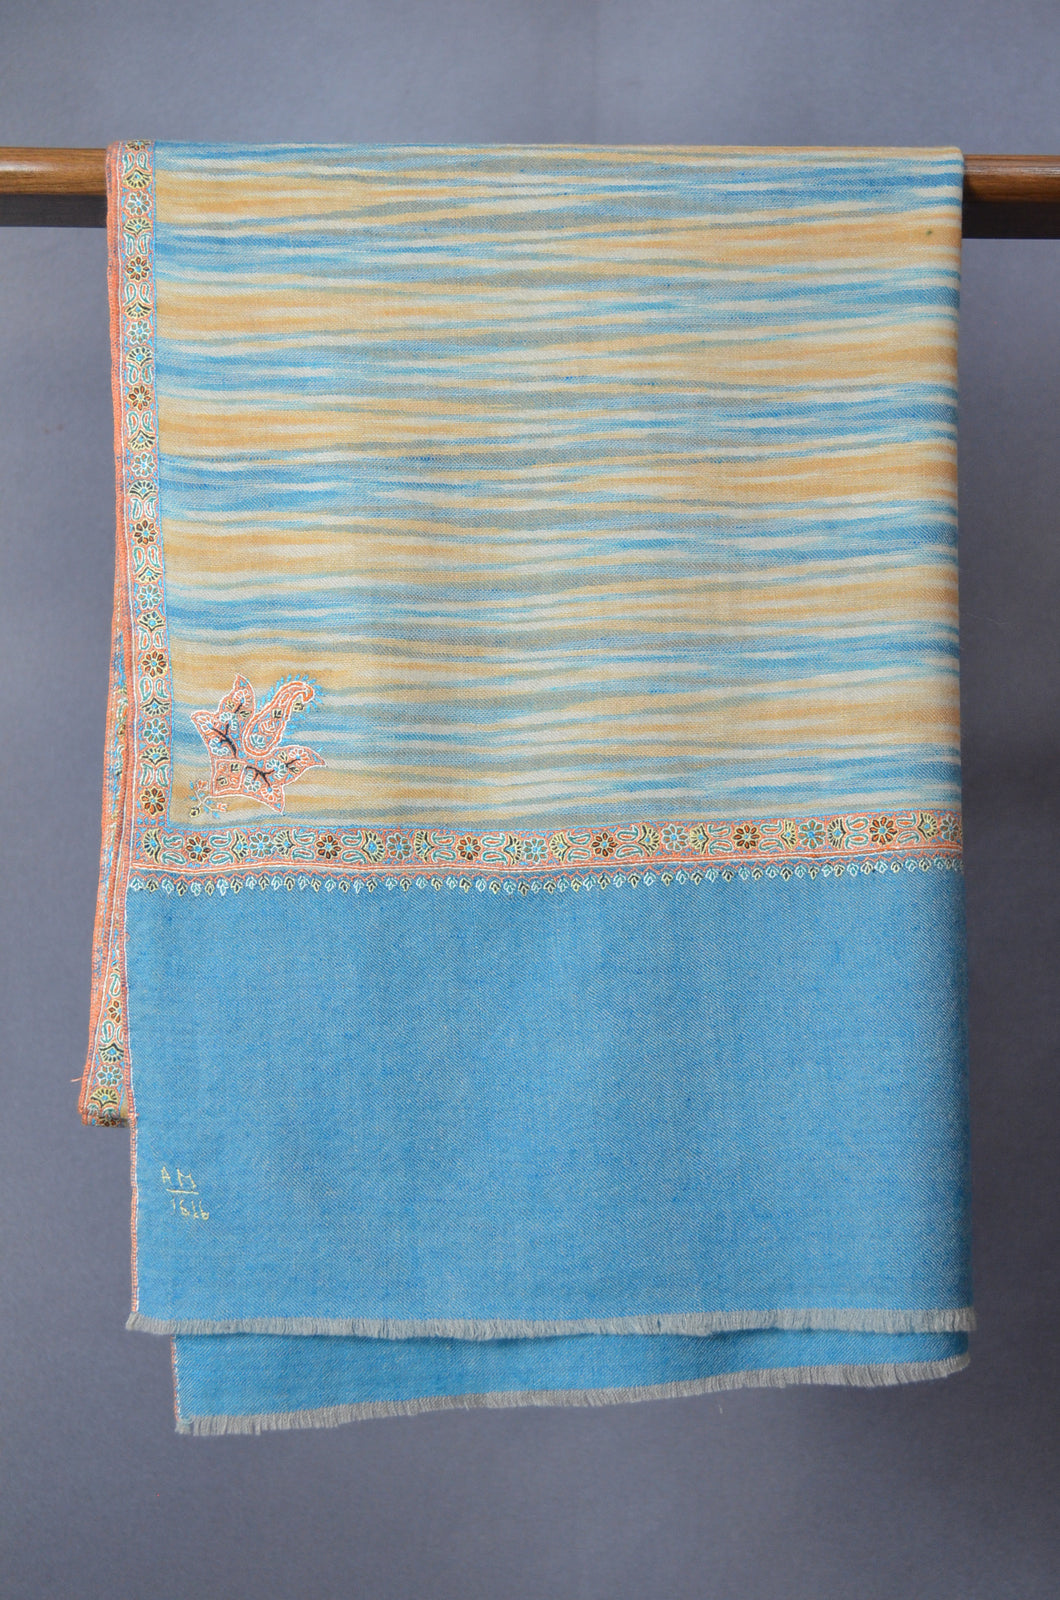 Ikat Yellow and Blue Border Embroidery Cashmere Pashmina Scarf